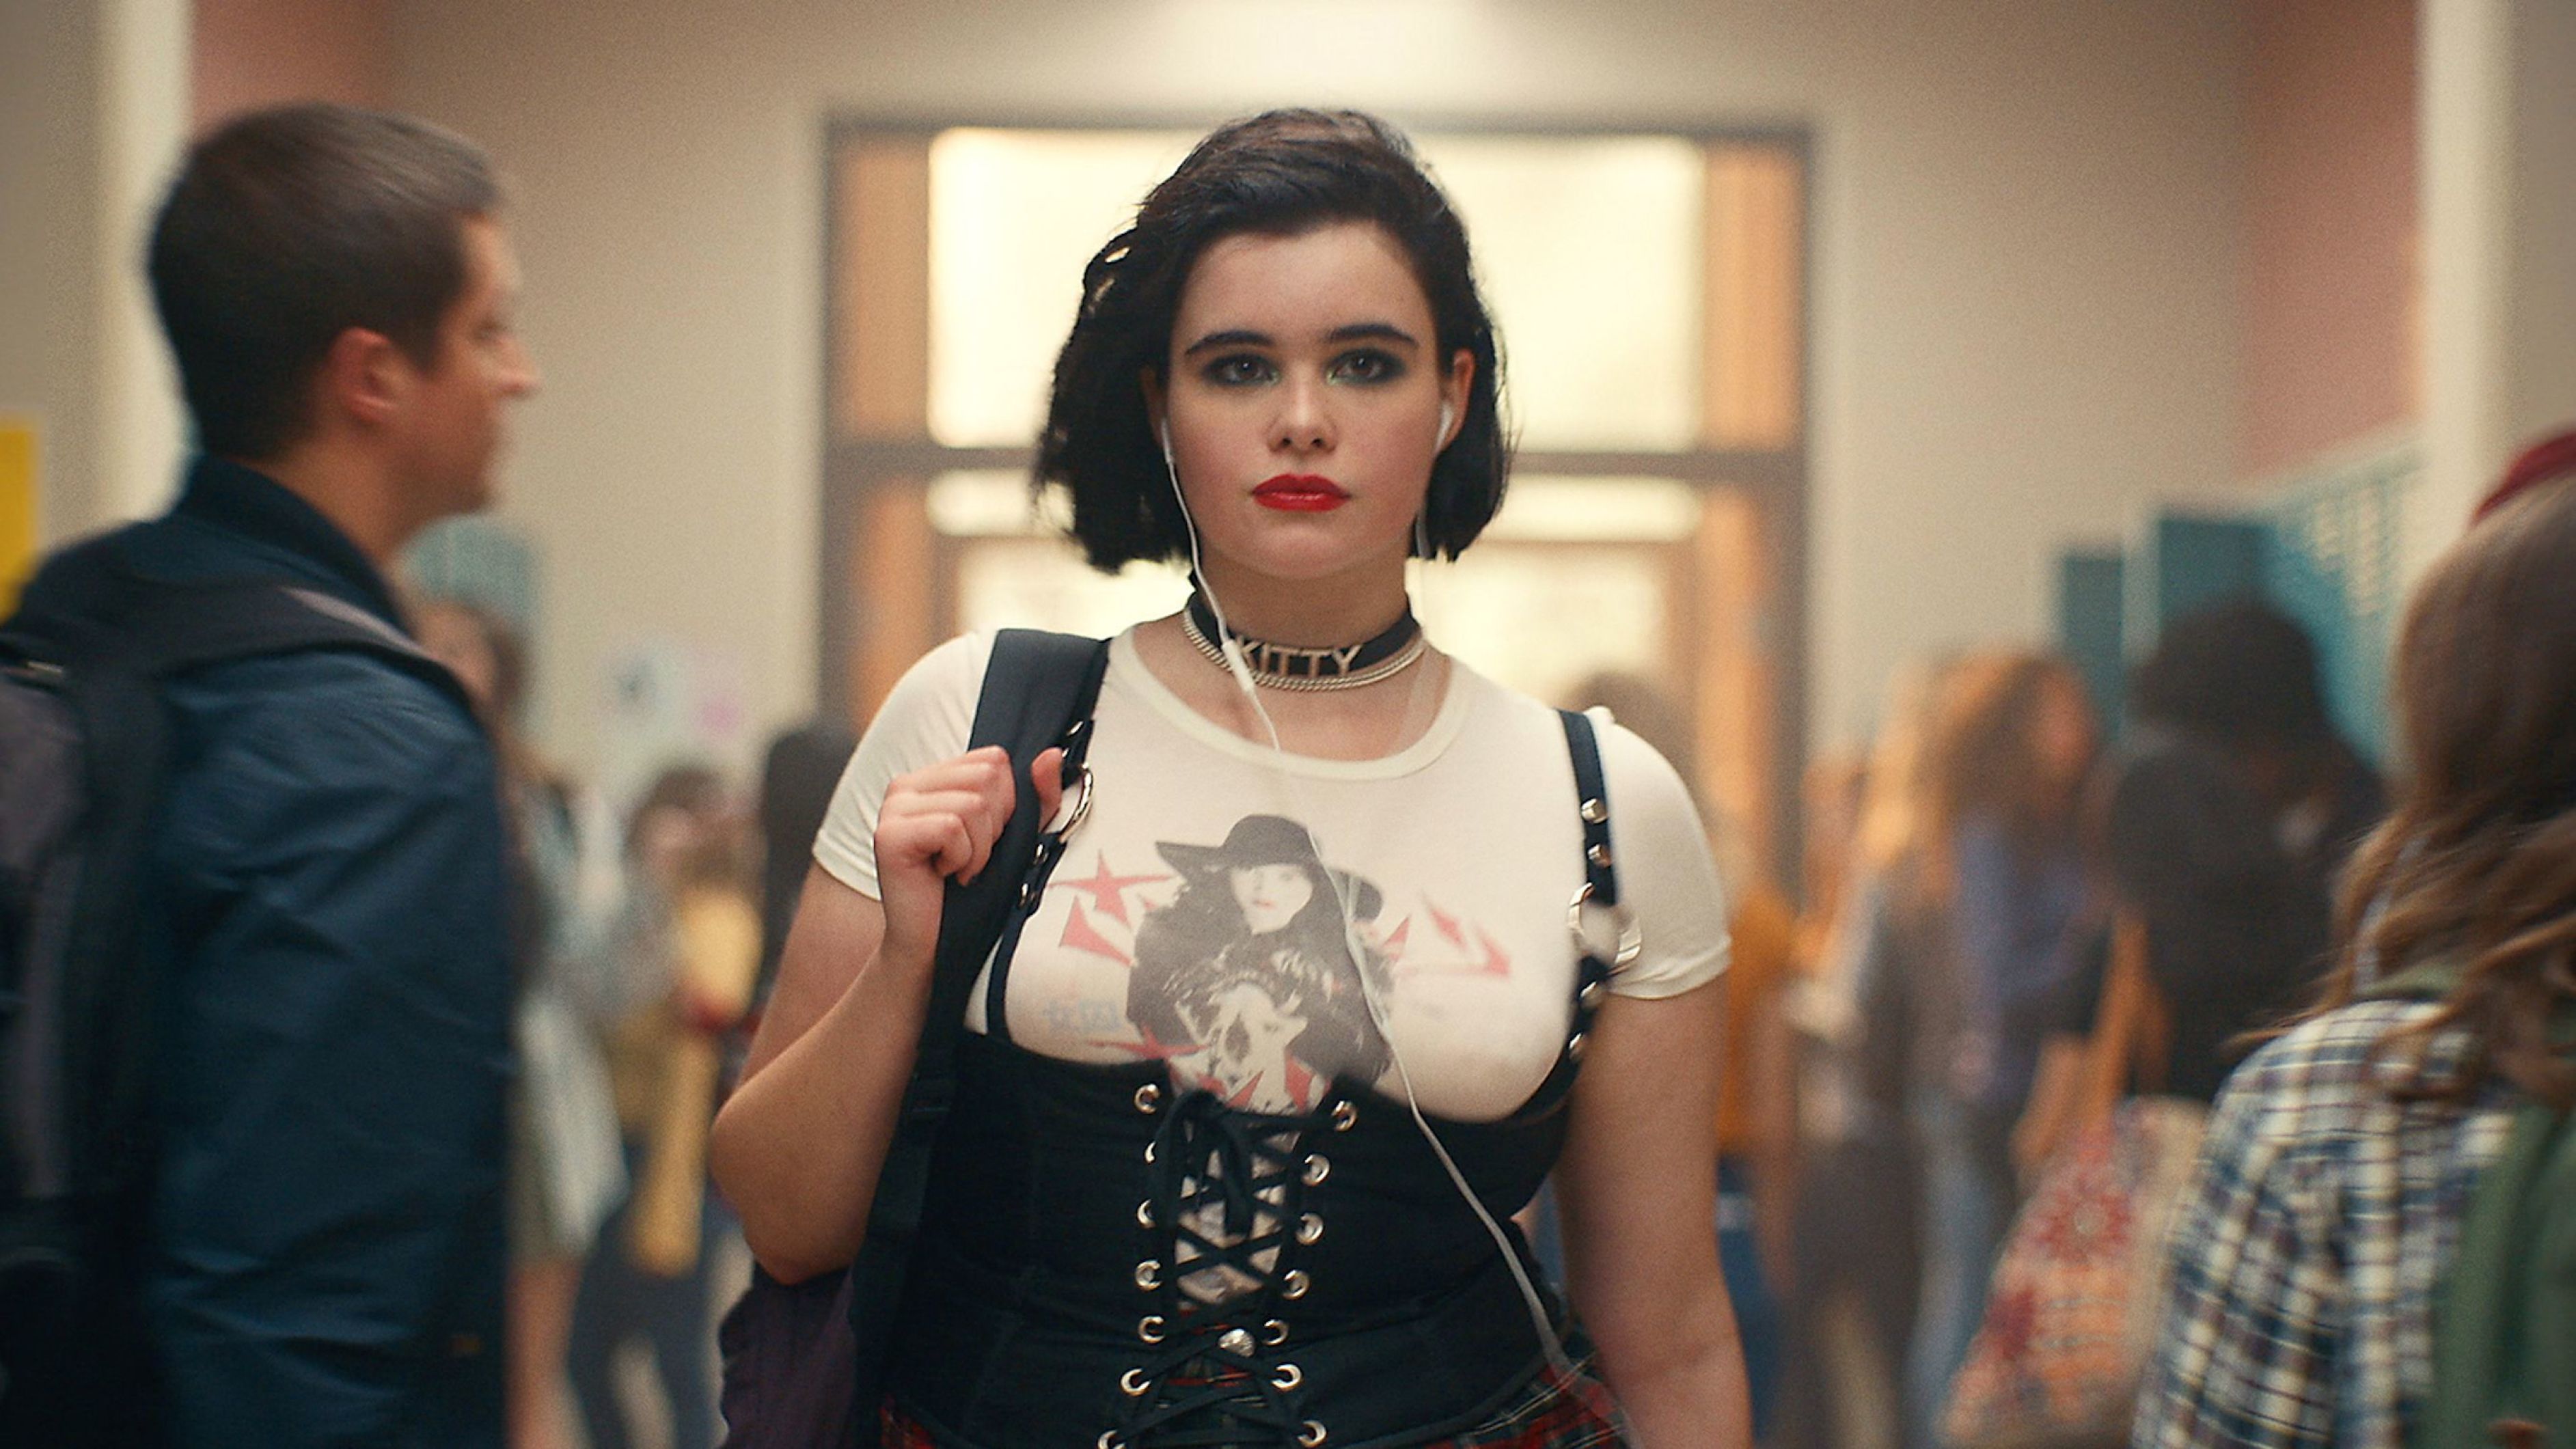 Barbie Ferreira played Kat Hernandez in HBO's Euphoria, and her storylines focused on her exploring her sexuality, self-confidence, and body-positivity